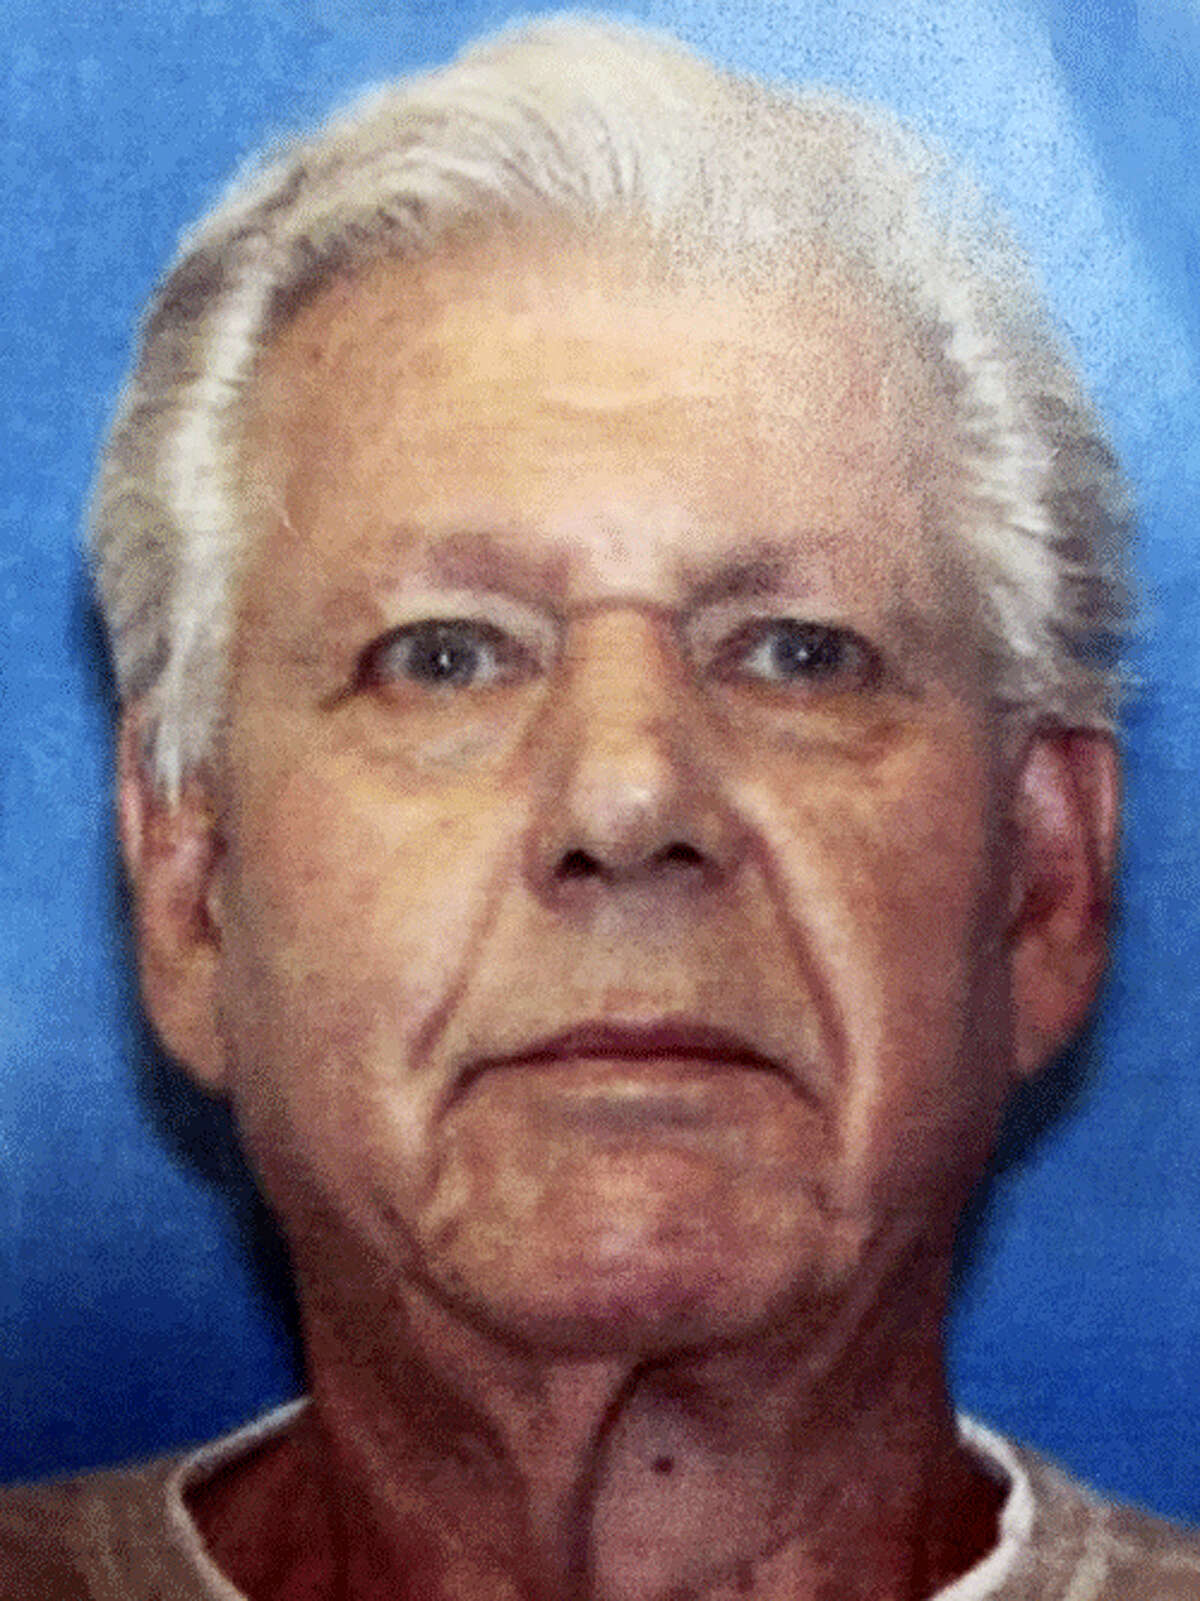 This undated photo released by the Georgia Department of Corrections shows Robert Stackowitz, 71, arrested Monday, May 9, 2016, by U.S. Marshals and Connecticut State Police in Sherman 48 years after escaping from a Georgia prison work camp.